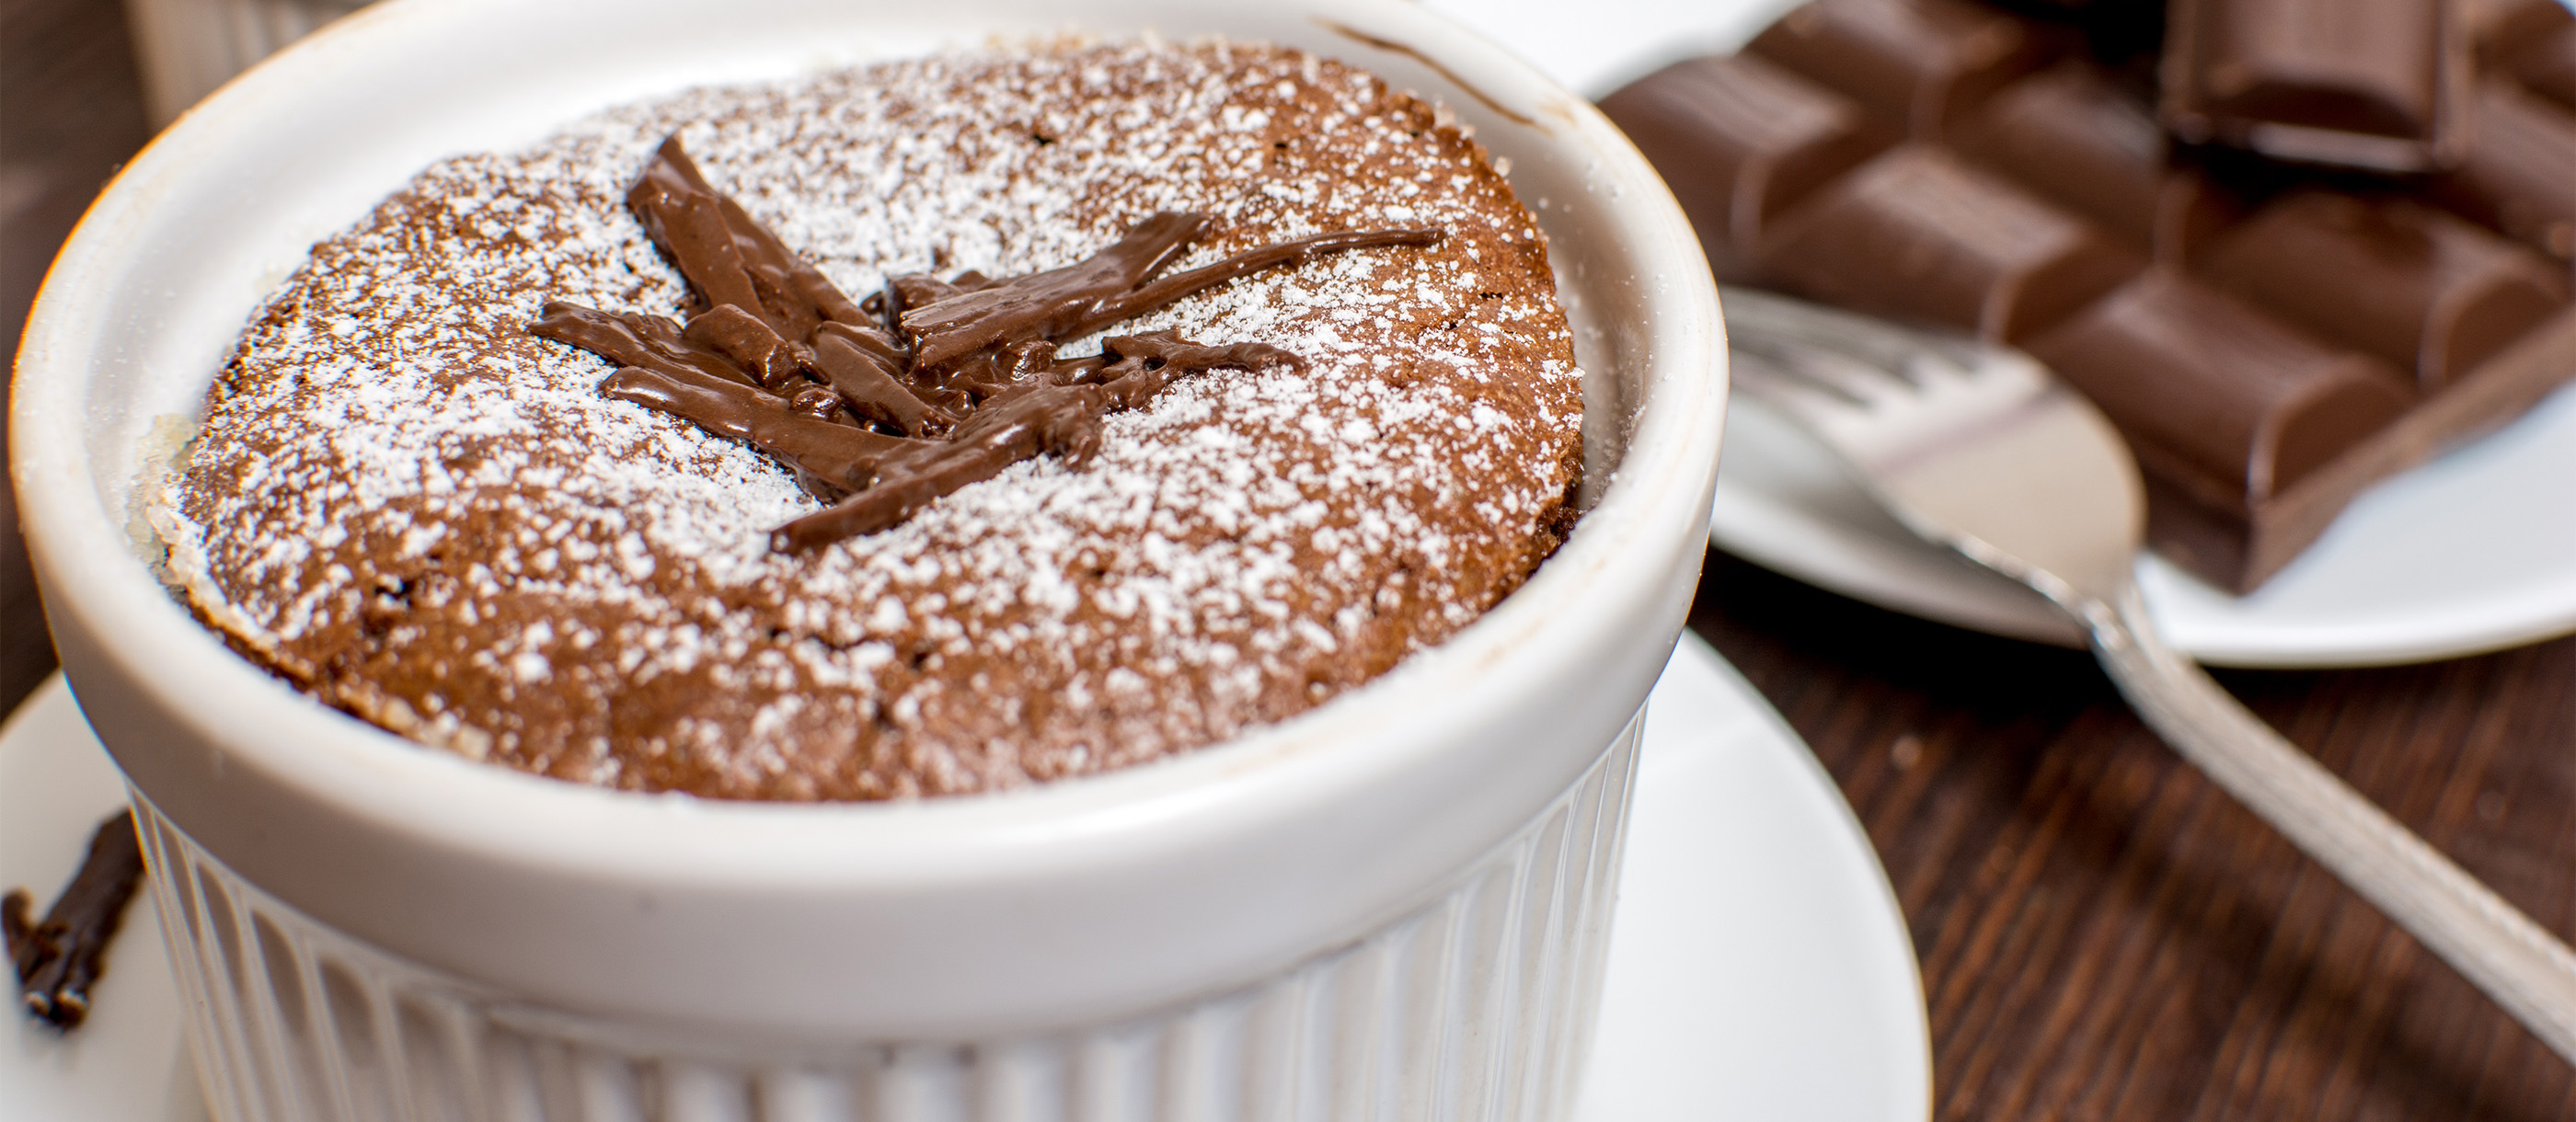 Roy's Chocolate Souffle (Molten Lava cake) - The Girl Who Ate Everything